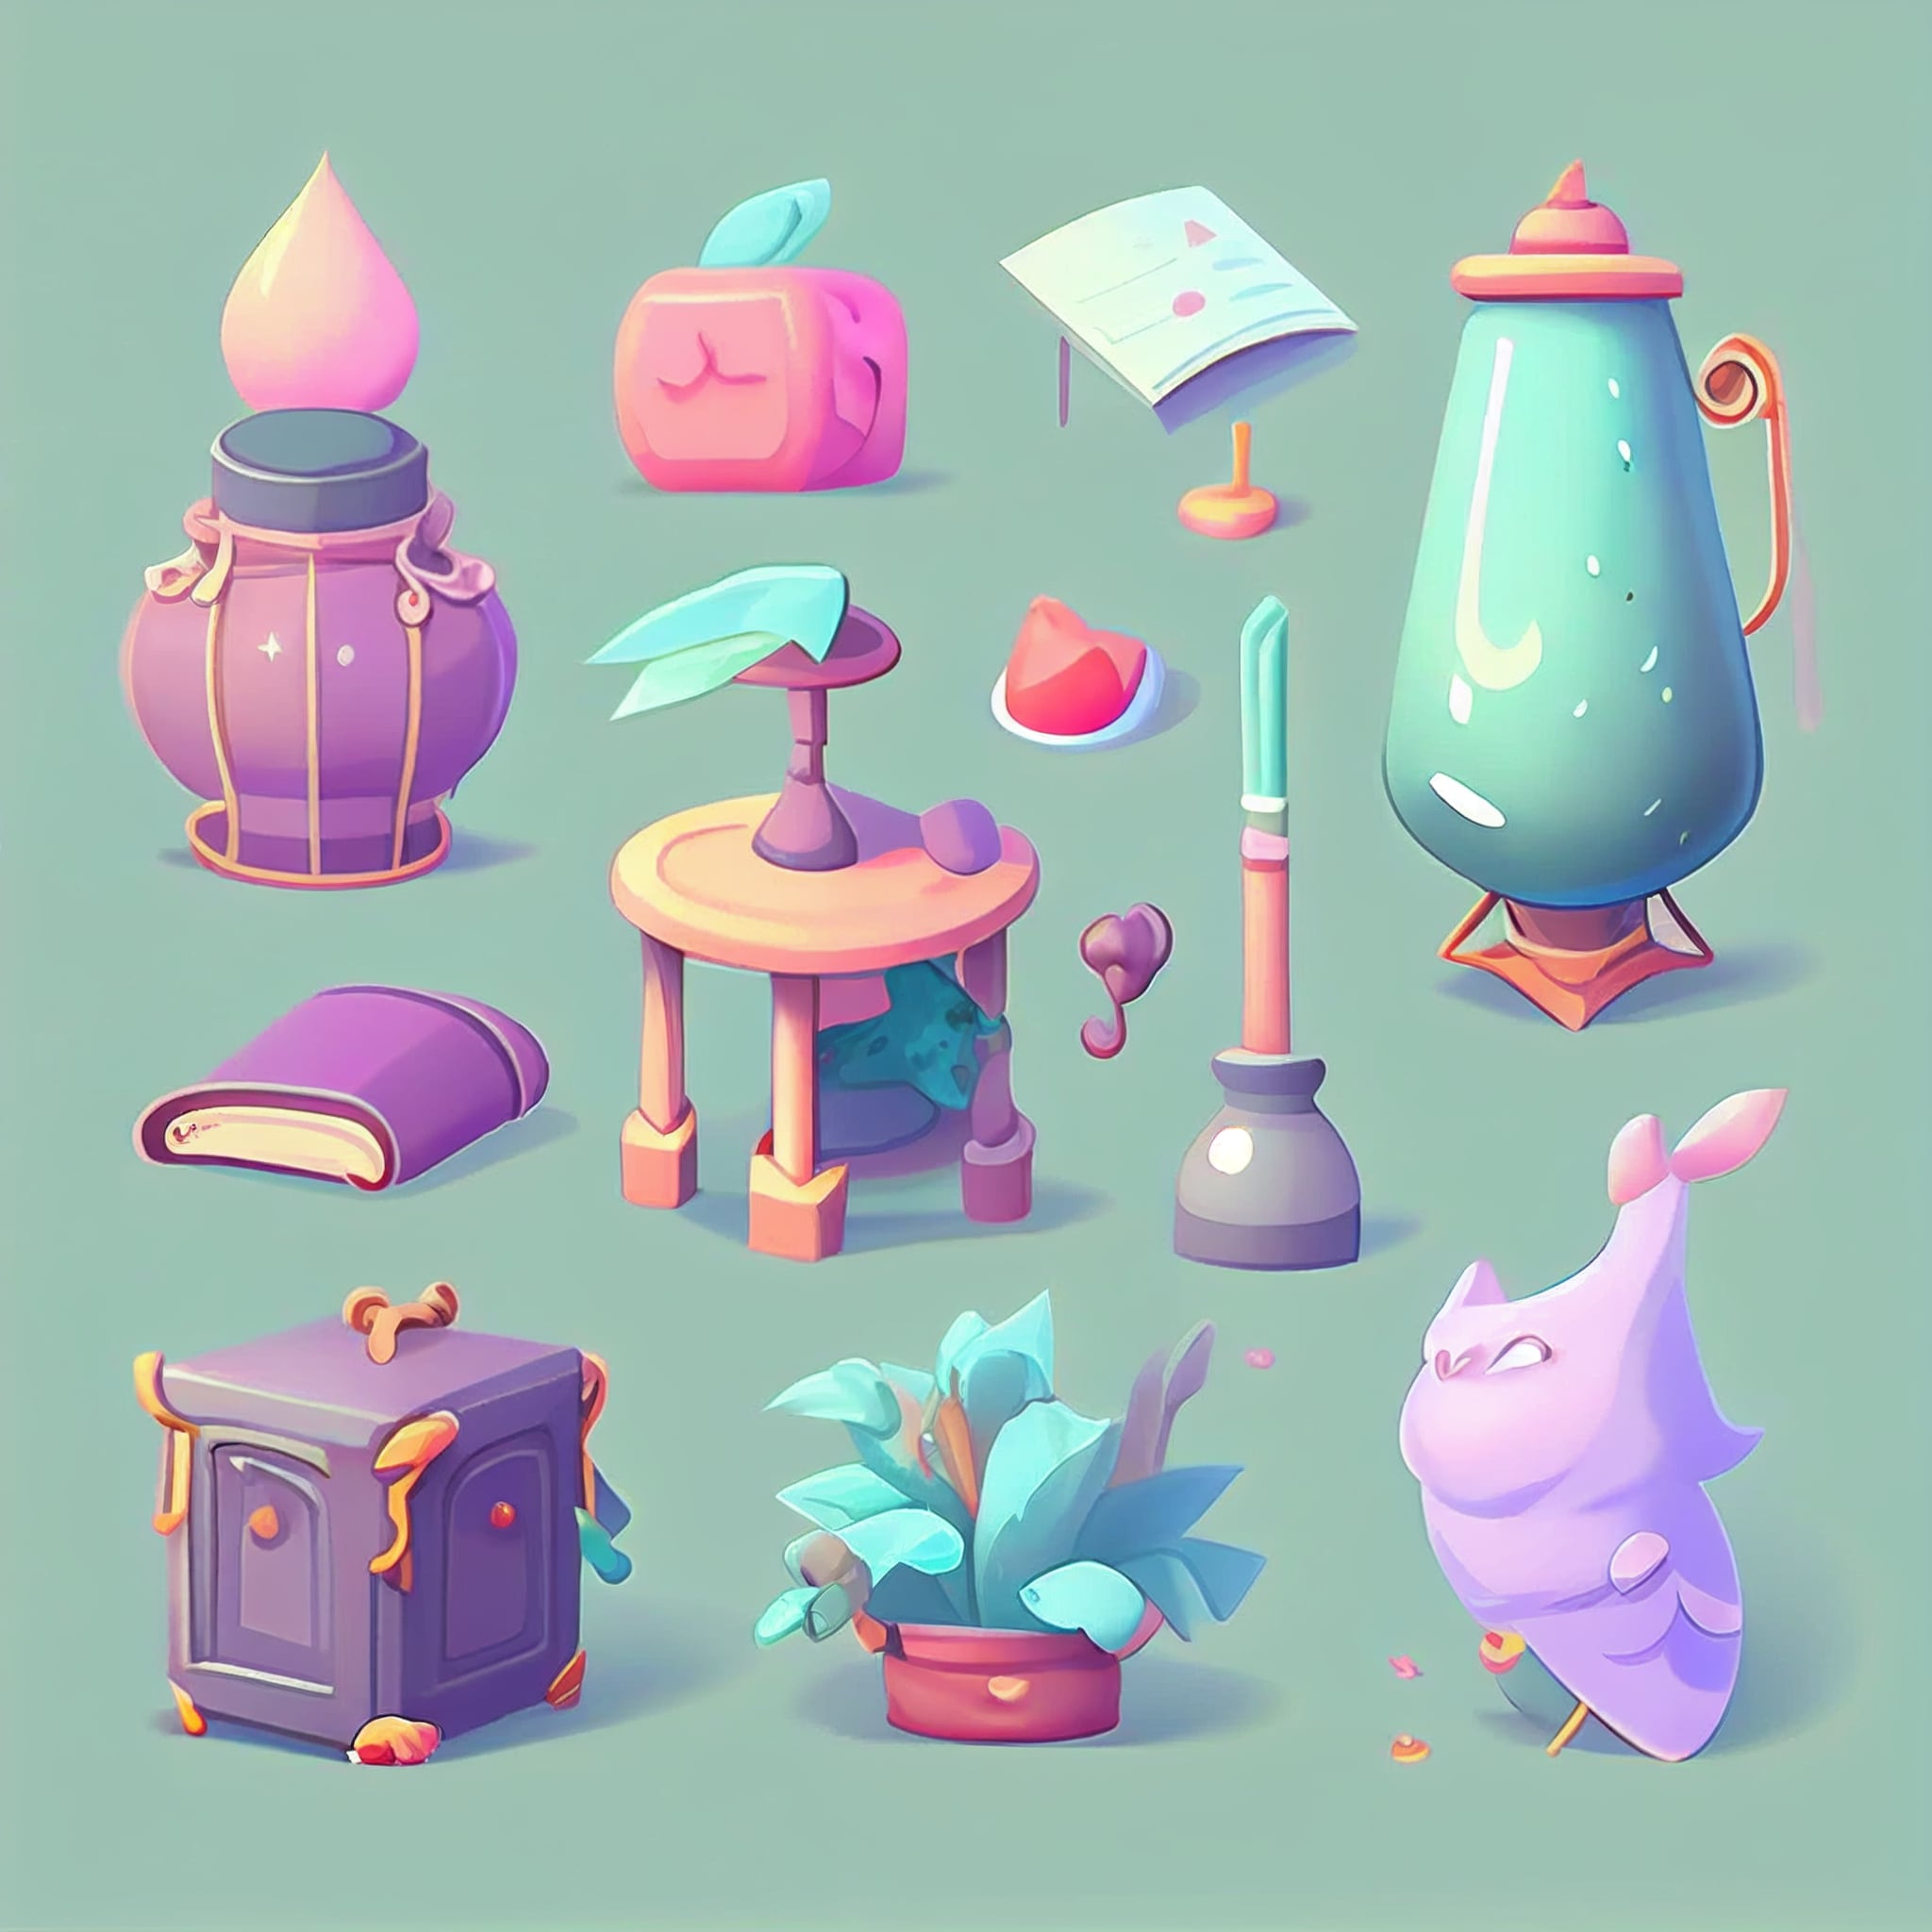 Bunch of objects that are on a blue background.